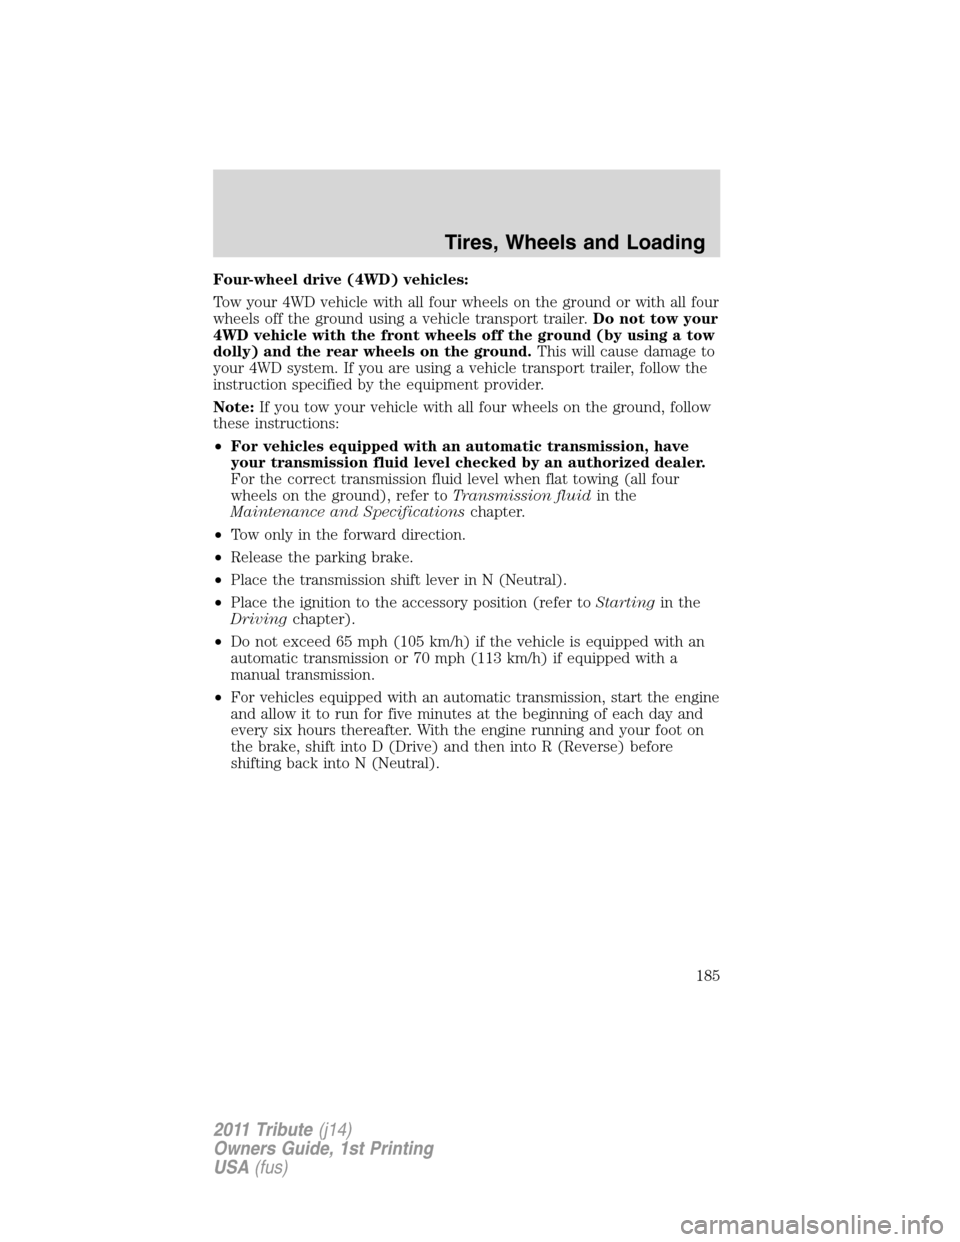 MAZDA MODEL TRIBUTE 2011  Owners Manual (in English) Four-wheel drive (4WD) vehicles:
Tow your 4WD vehicle with all four wheels on the ground or with all four
wheels off the ground using a vehicle transport trailer.Do not tow your
4WD vehicle with the f